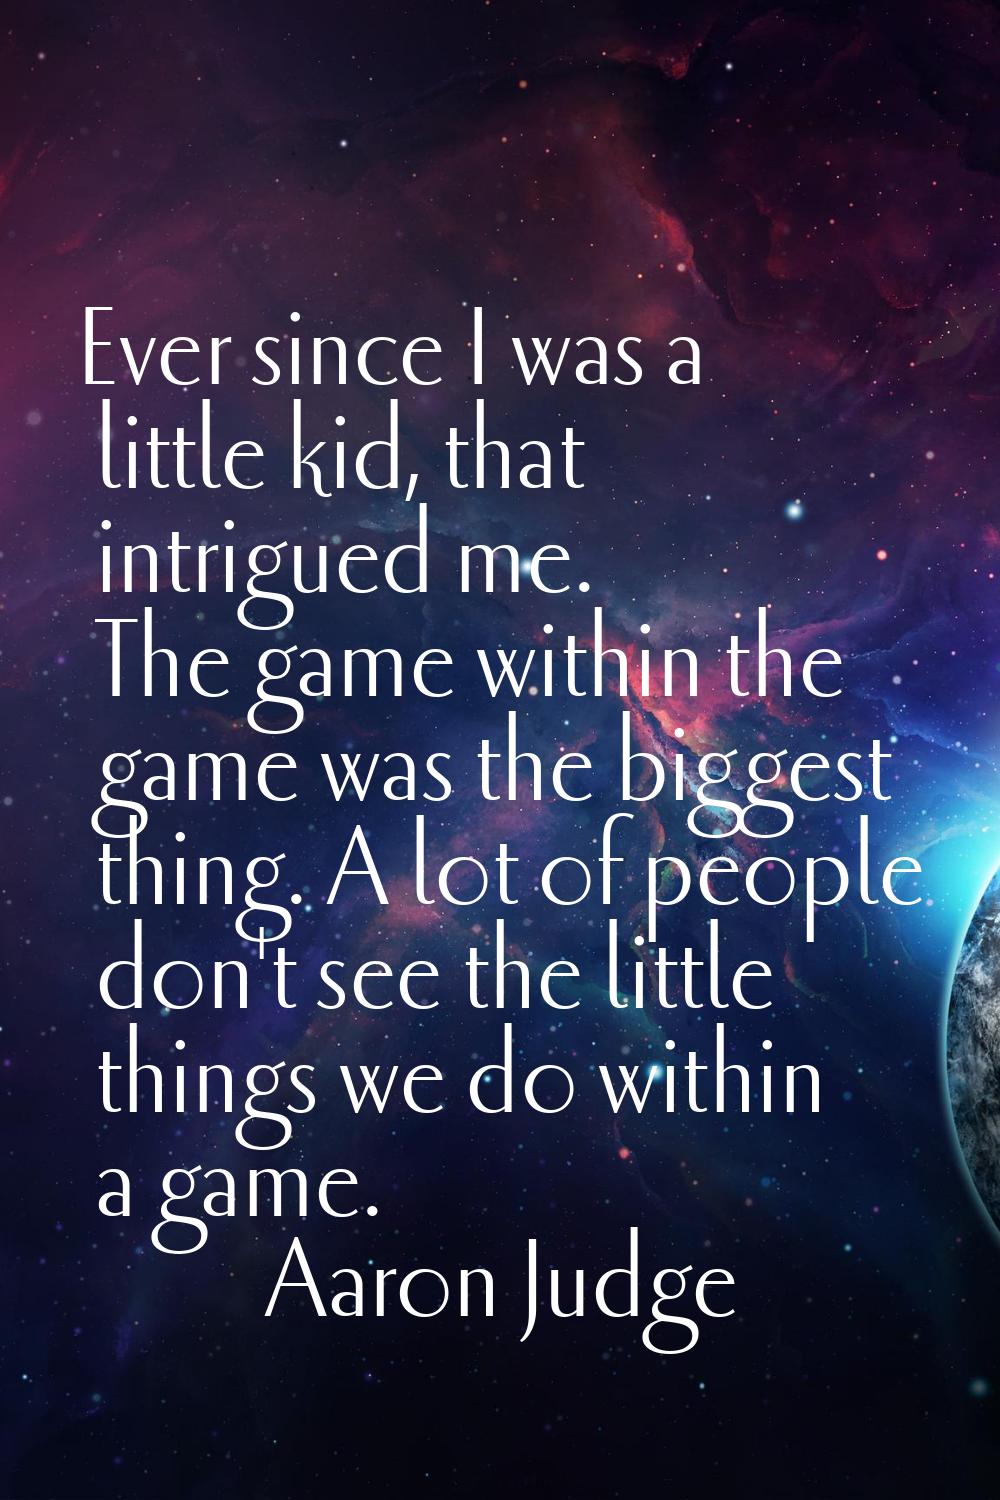 Ever since I was a little kid, that intrigued me. The game within the game was the biggest thing. A